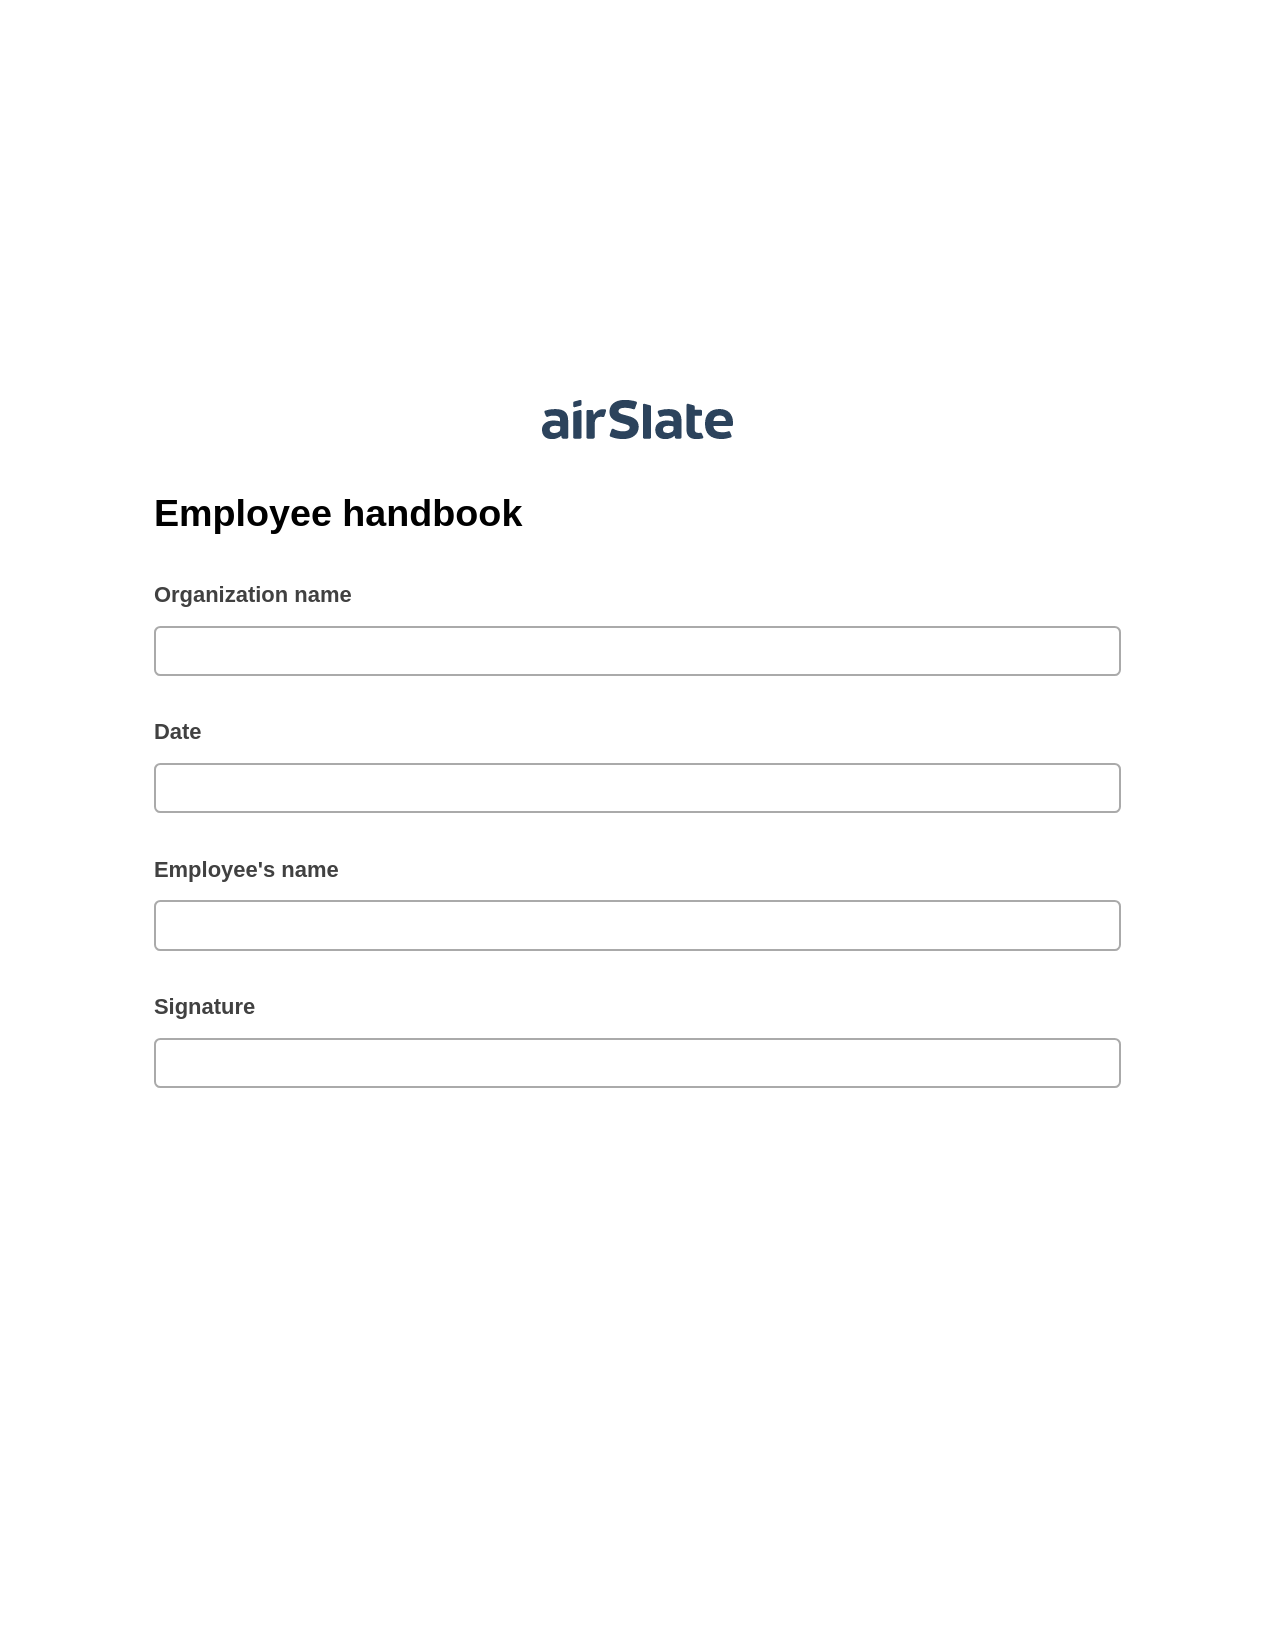 Employee handbook Pre-fill from Google Sheets Bot, Send a Slate to MS Dynamics 365 Contact Bot, Post-finish Document Bot